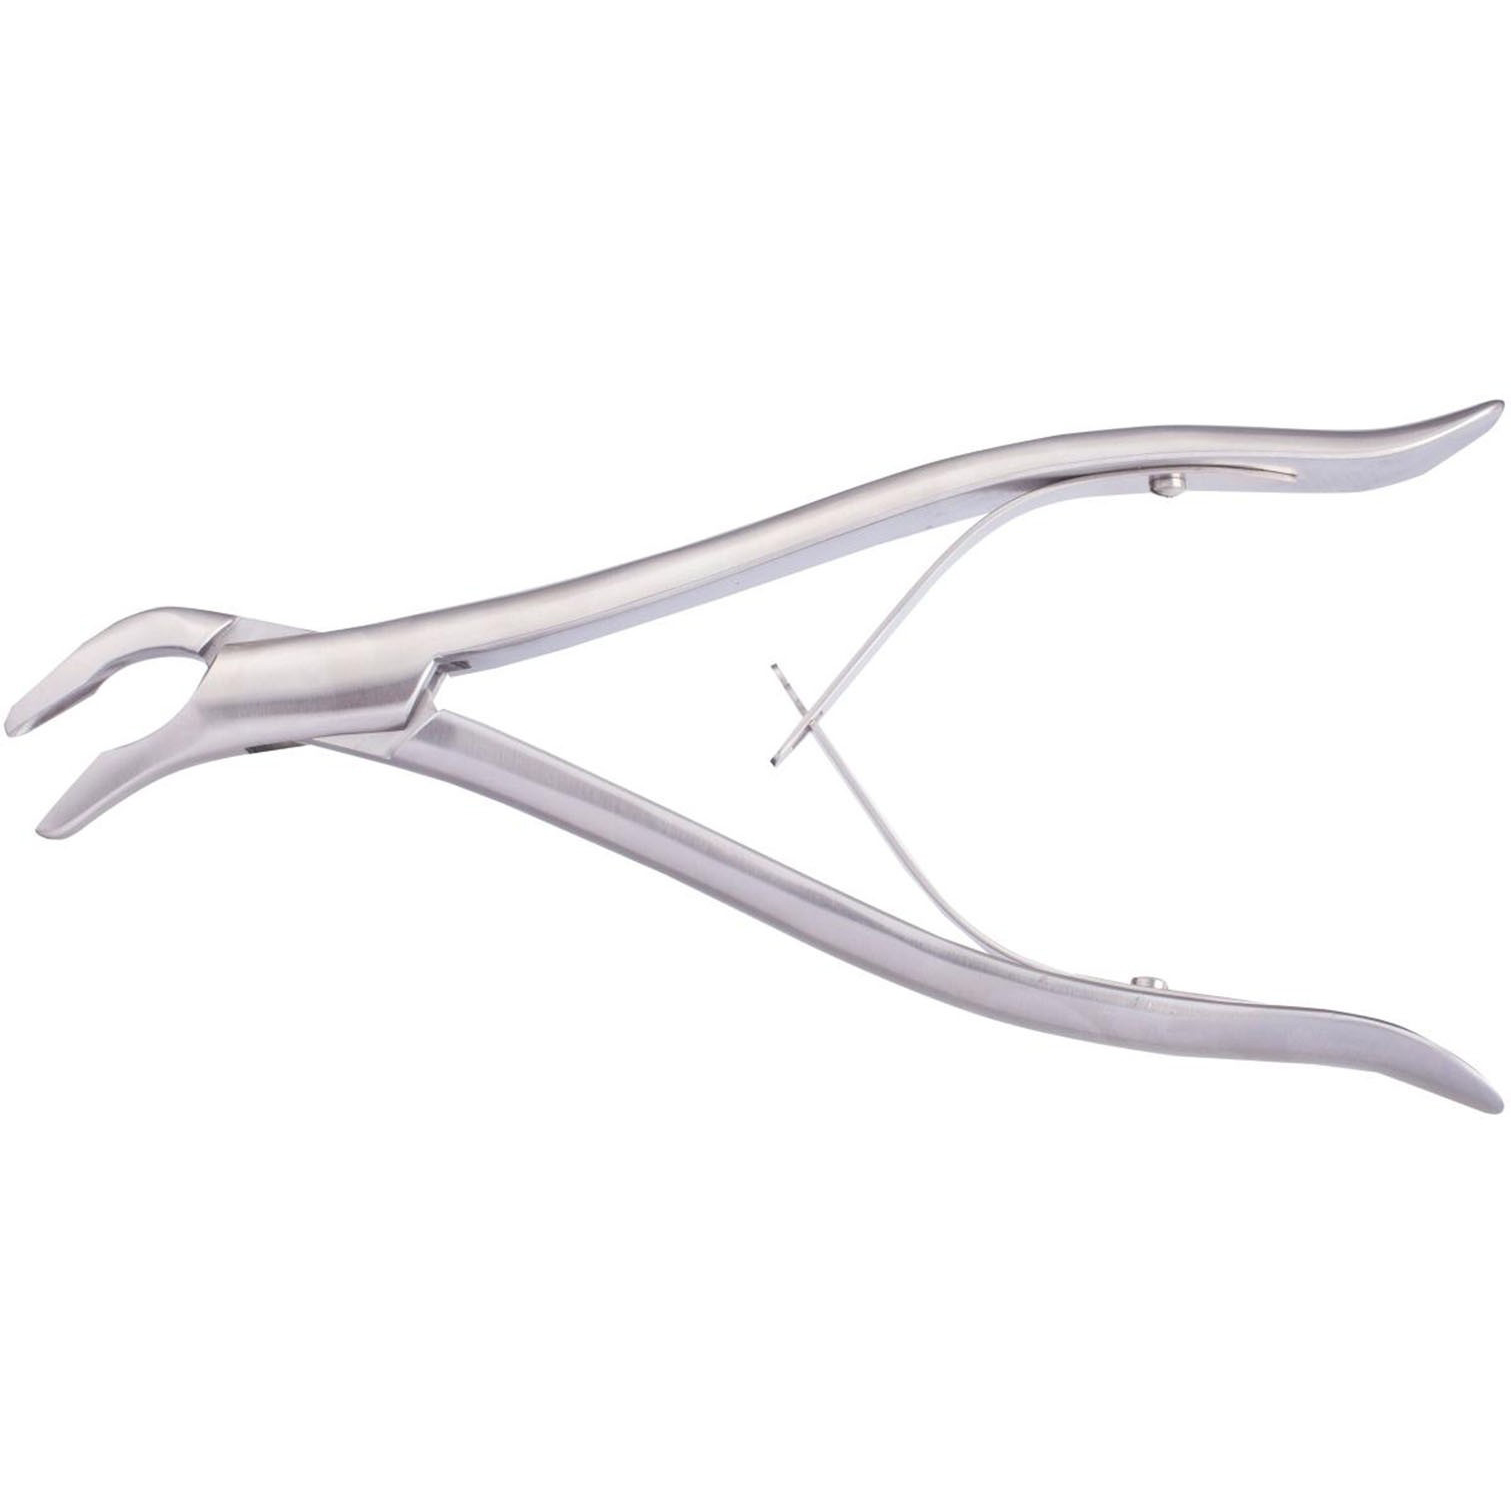  ADSON CRANIAL RONGEUR FORCEPS